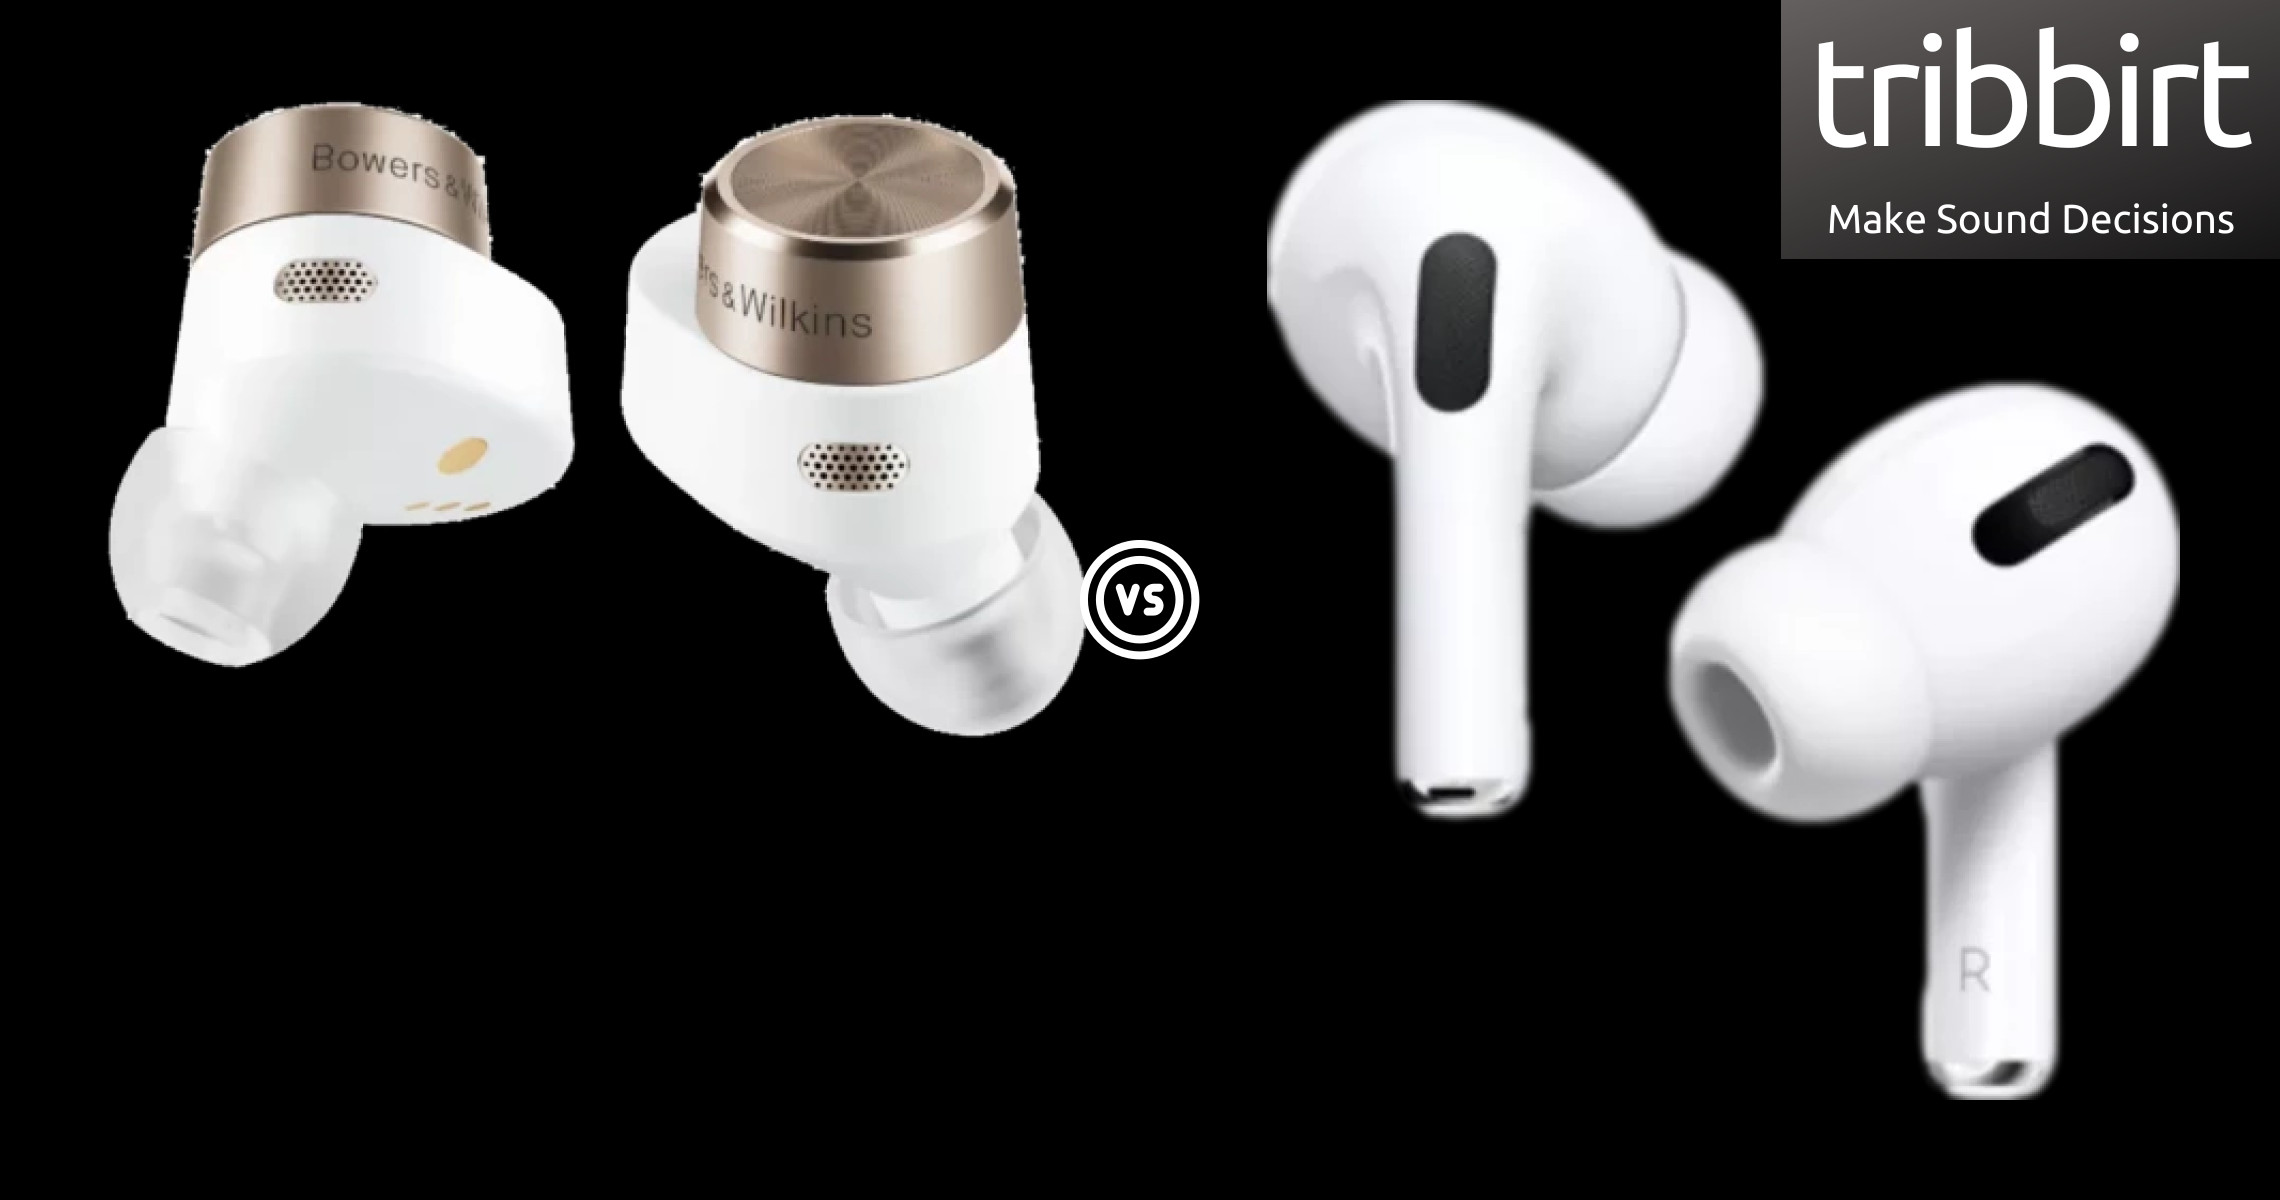  Apple Airpods Pro (2Nd Gen) Vs. Bowers & Wilkins Pi7